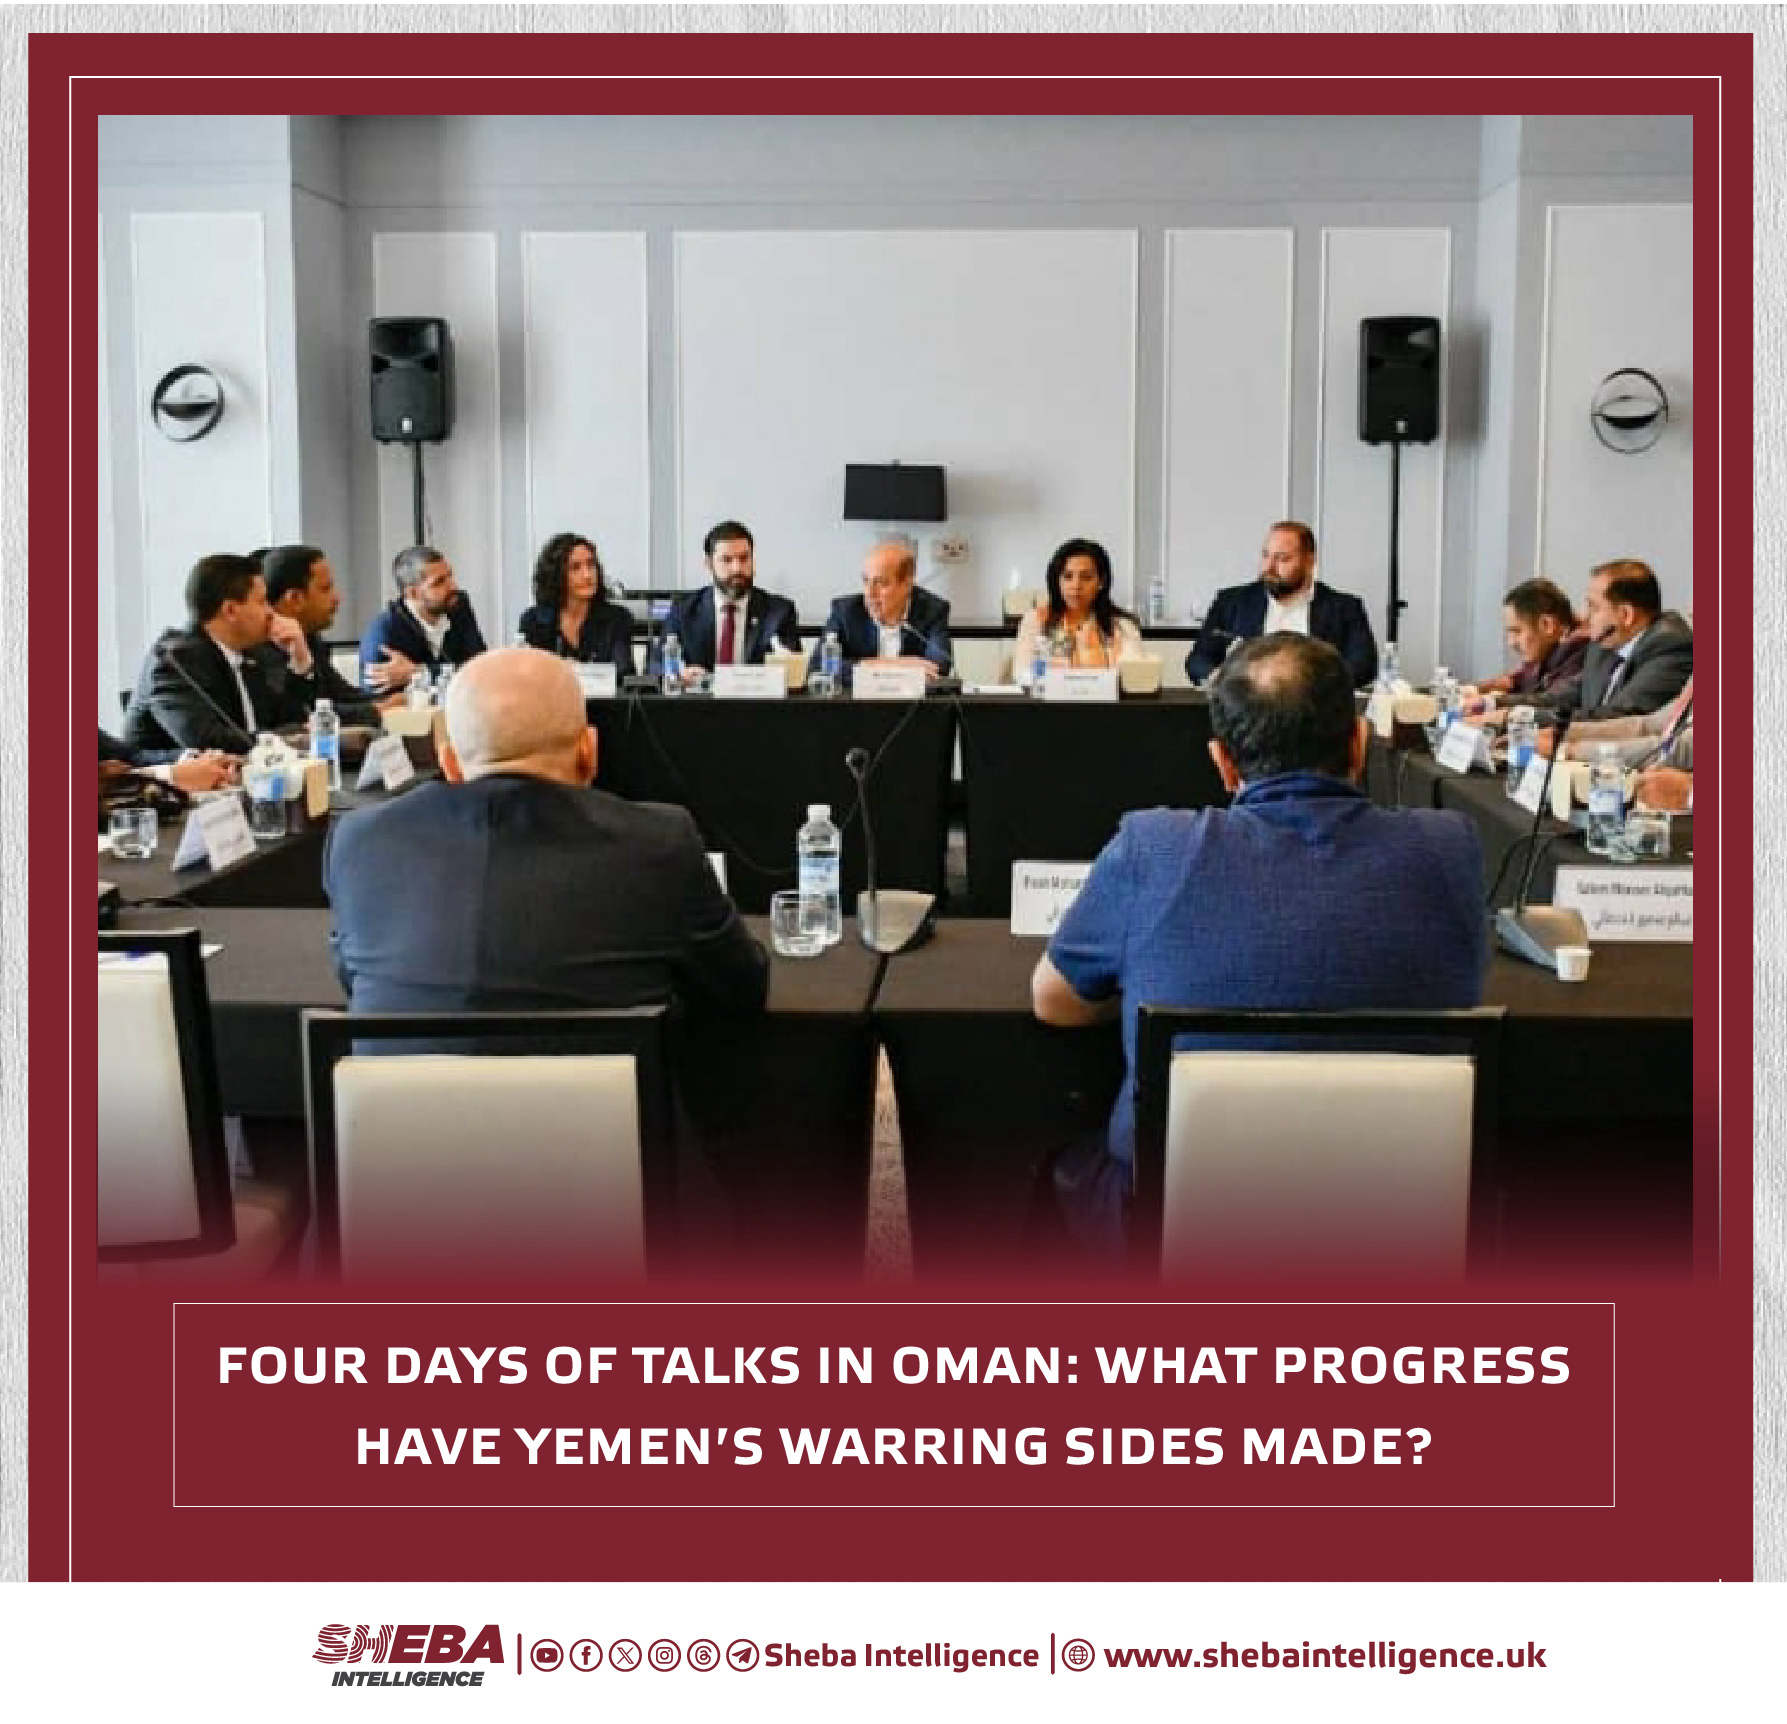 Four Days of Talks in Oman: What Progress Have Yemen's Warring Sides Made?